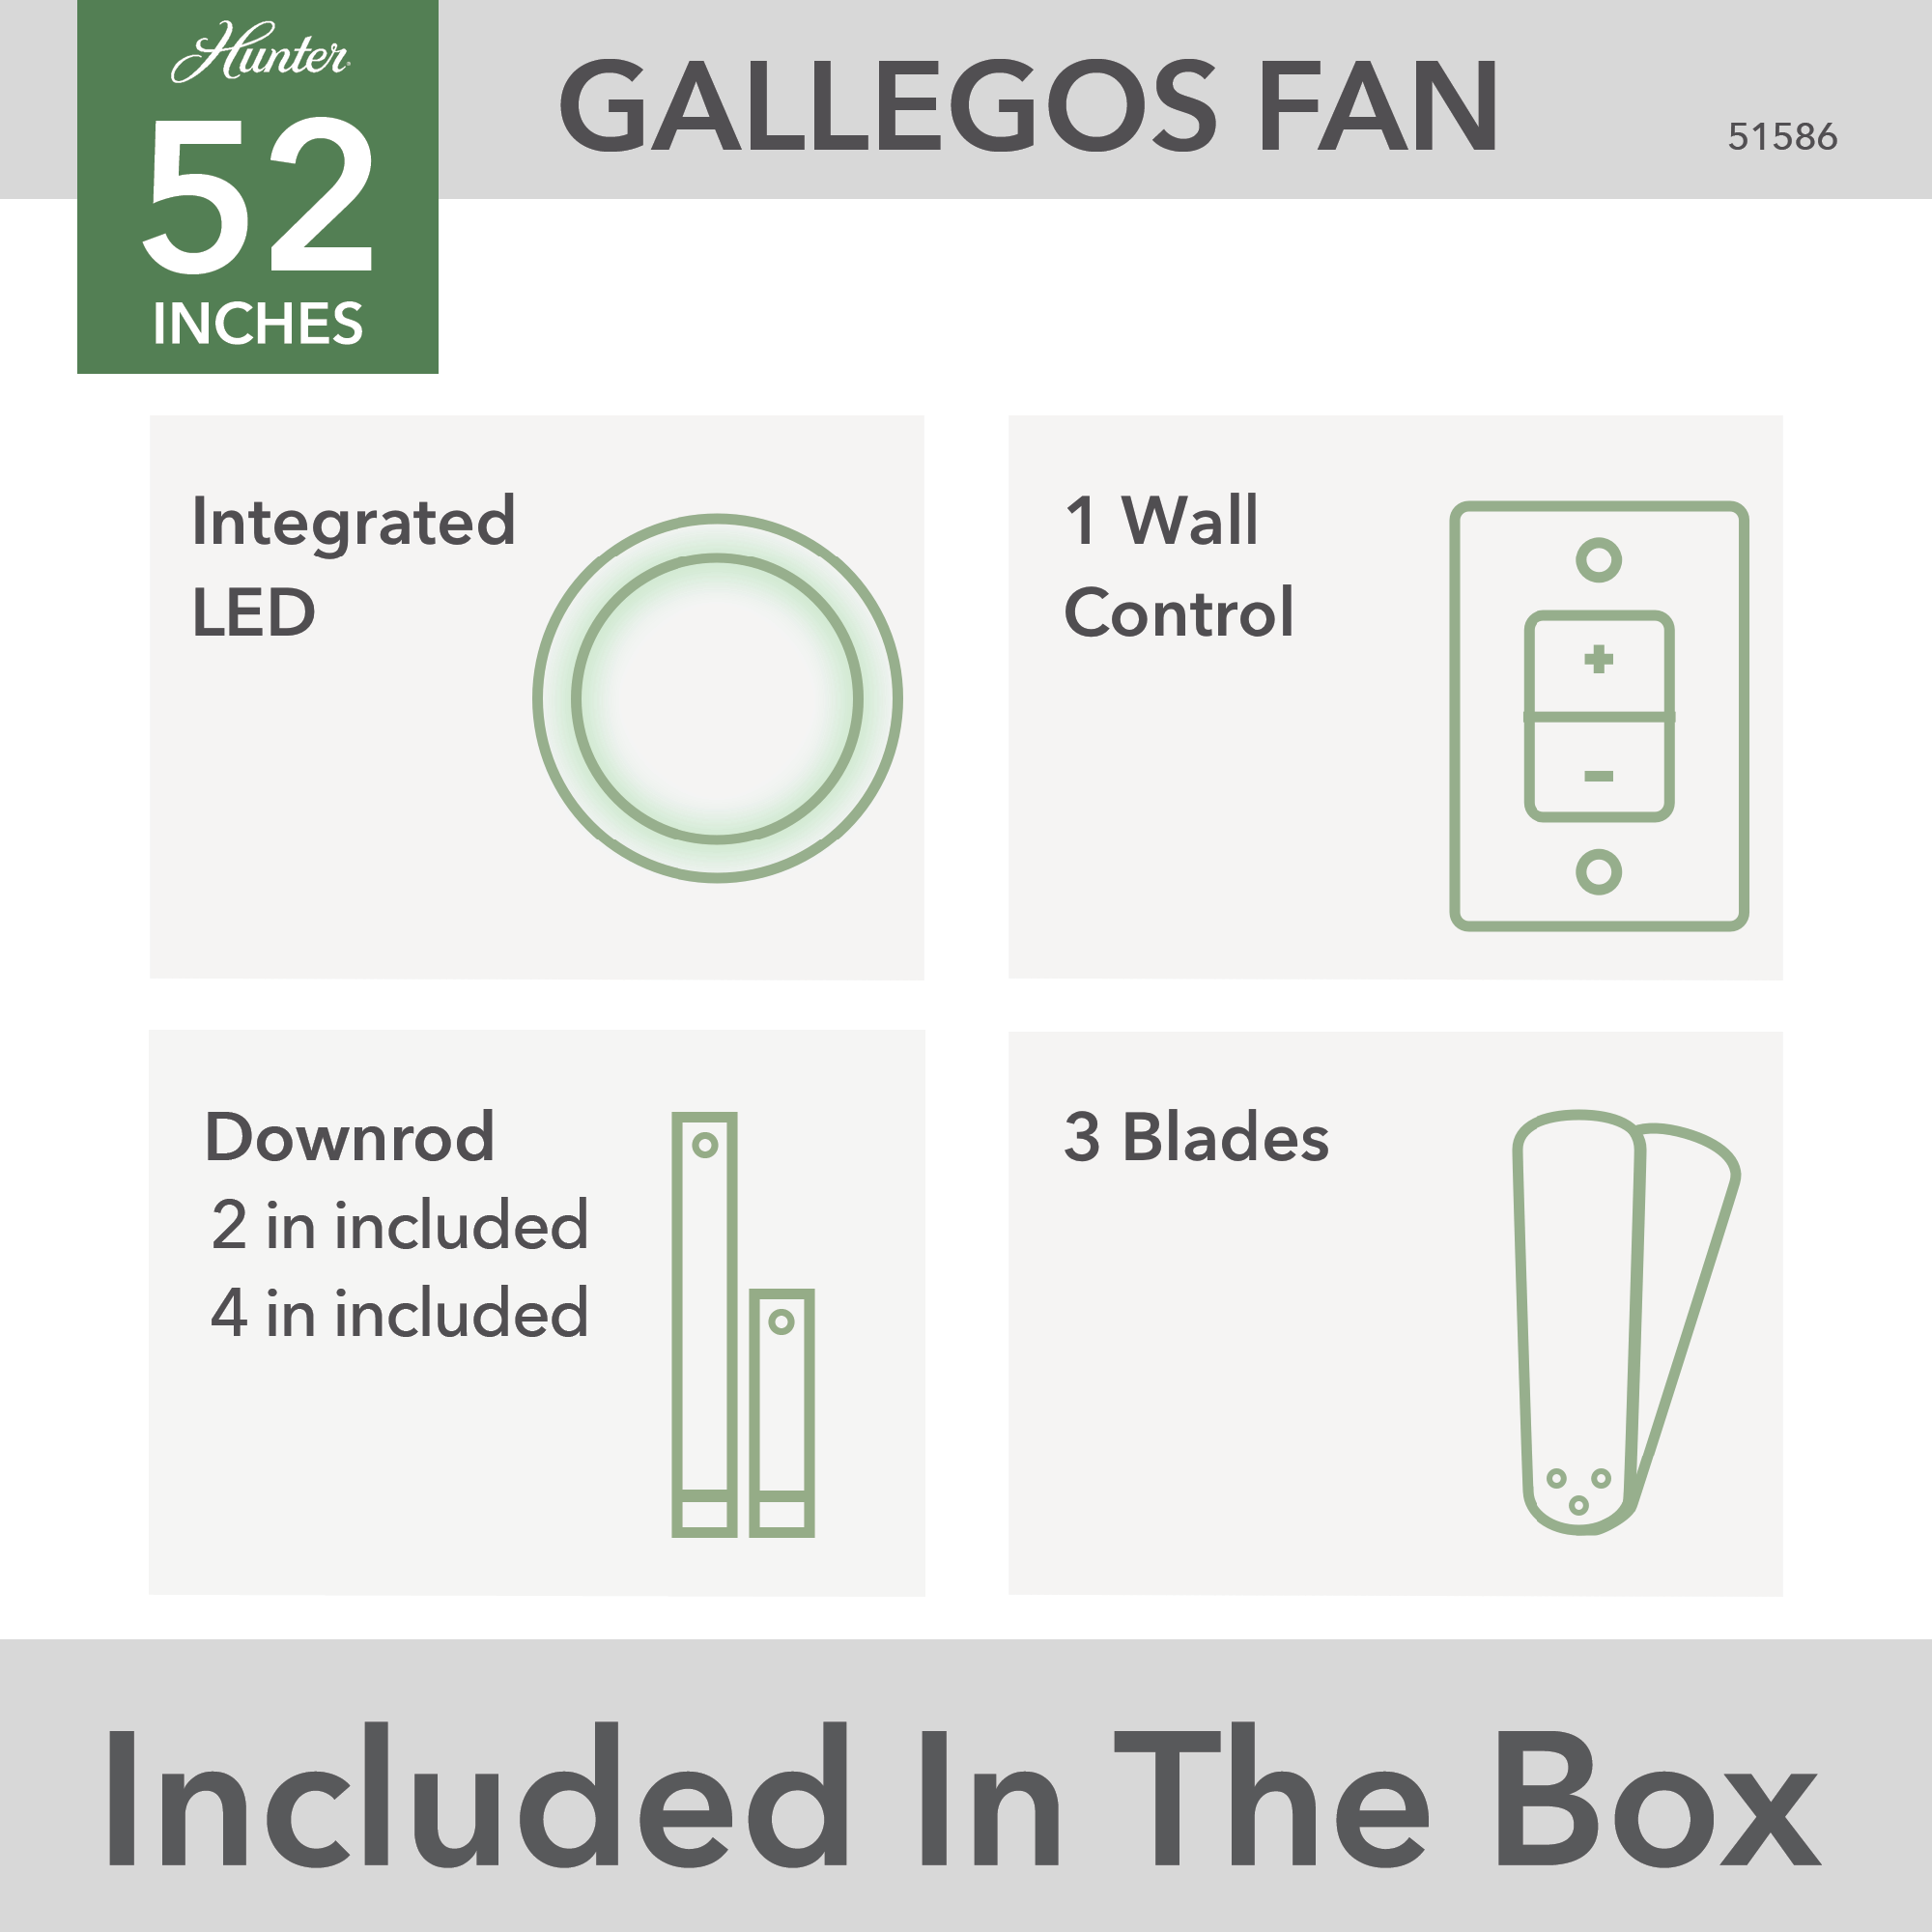 Hunter 52 inch Gallegos Damp Rated Ceiling Fan and Wall Control